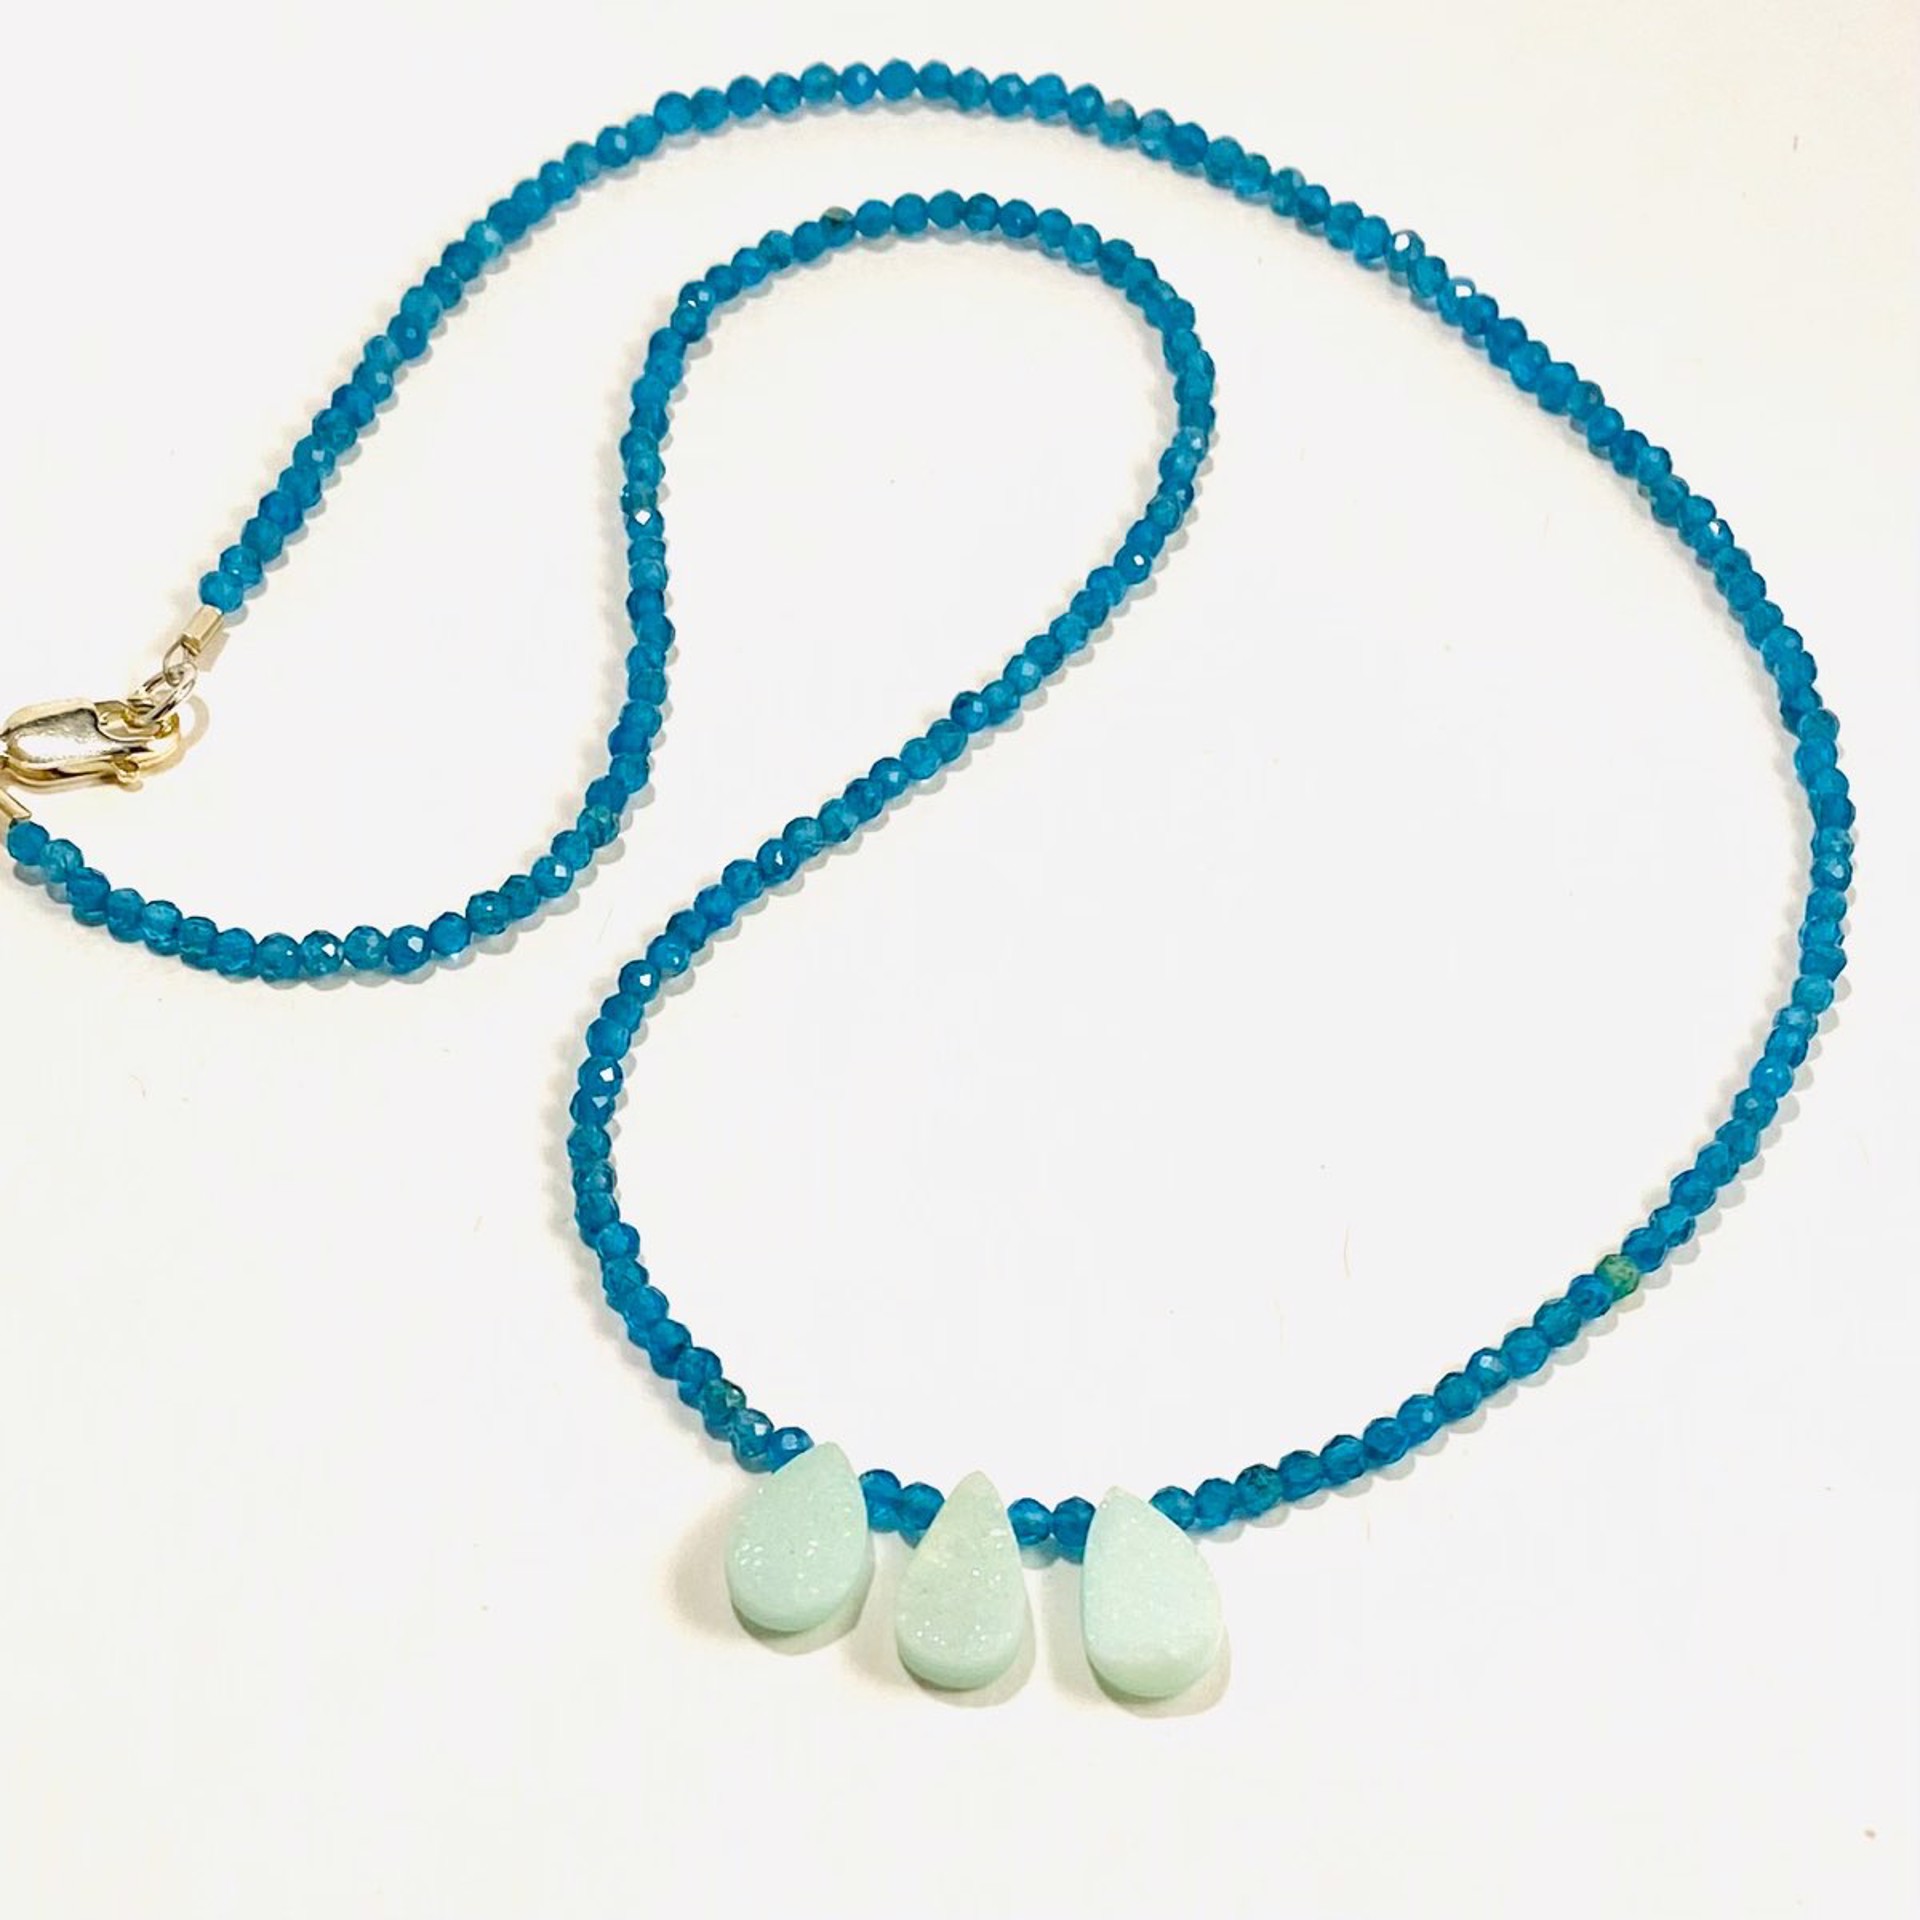 NT22-237  Faceted Tiny Neon Apatite Three Teardrop Druzy Focal Necklace by Nance Trueworthy